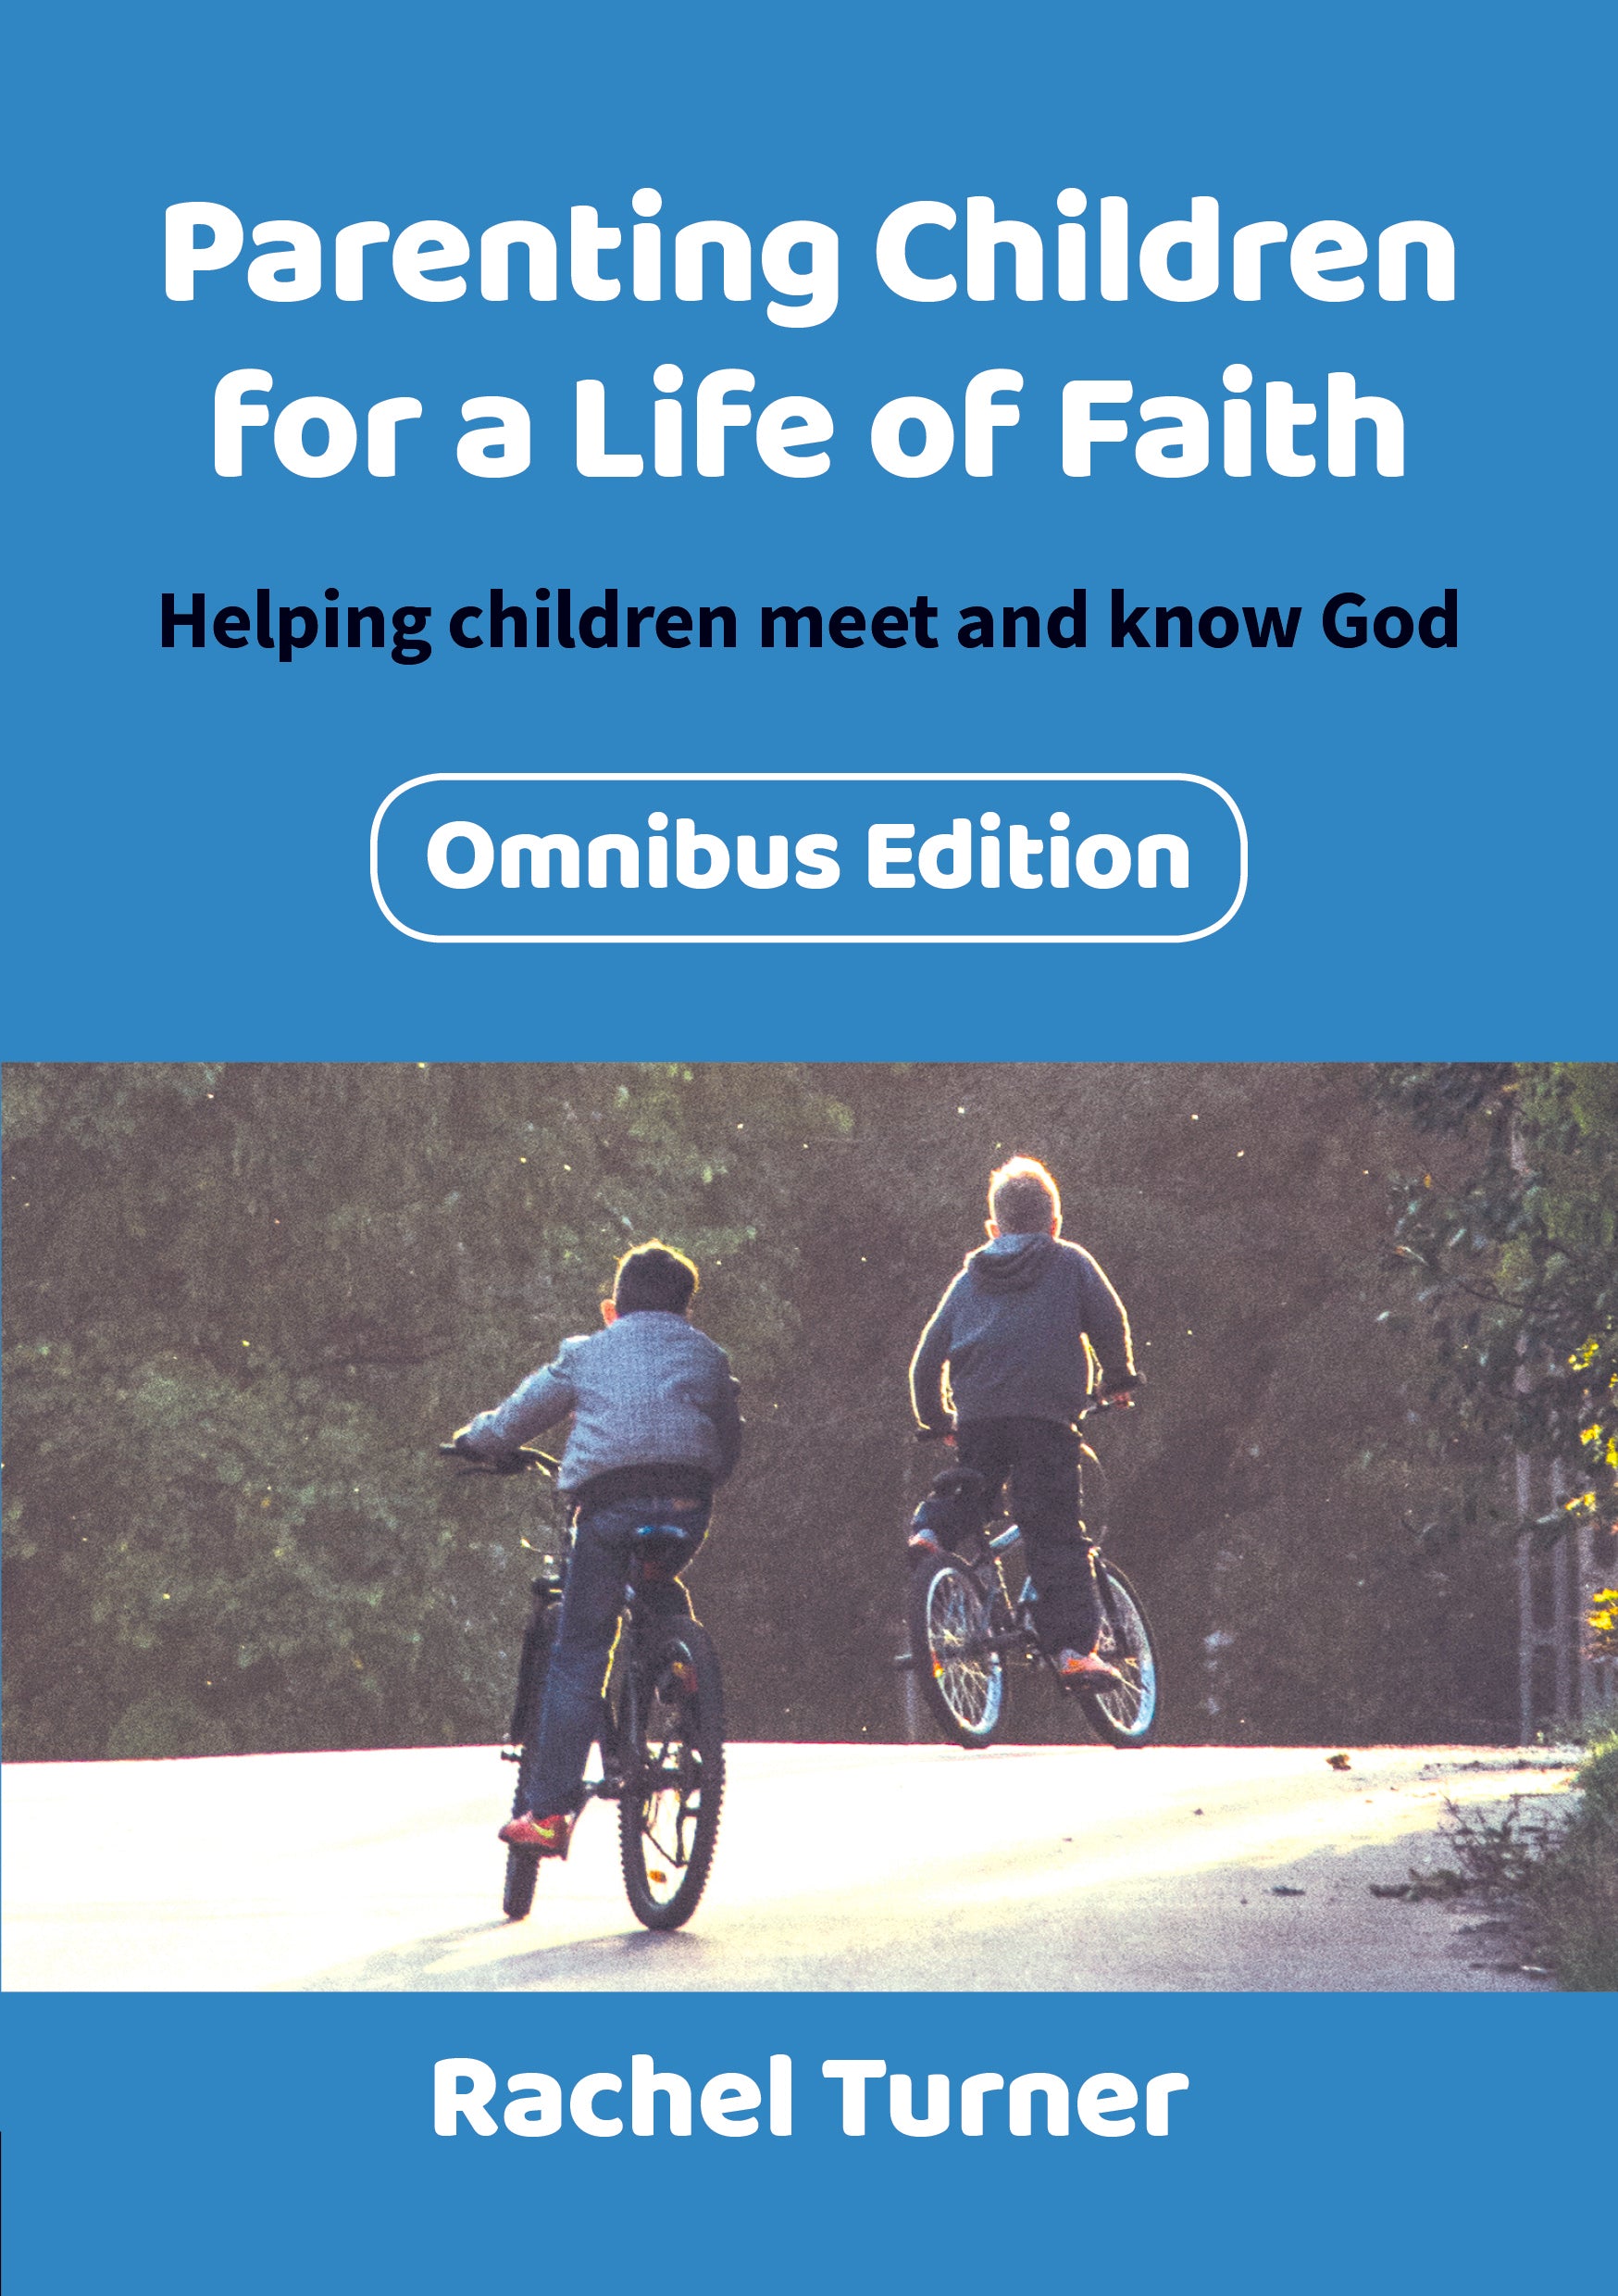 Image of Parenting Children for a Life of Faith omnibus other